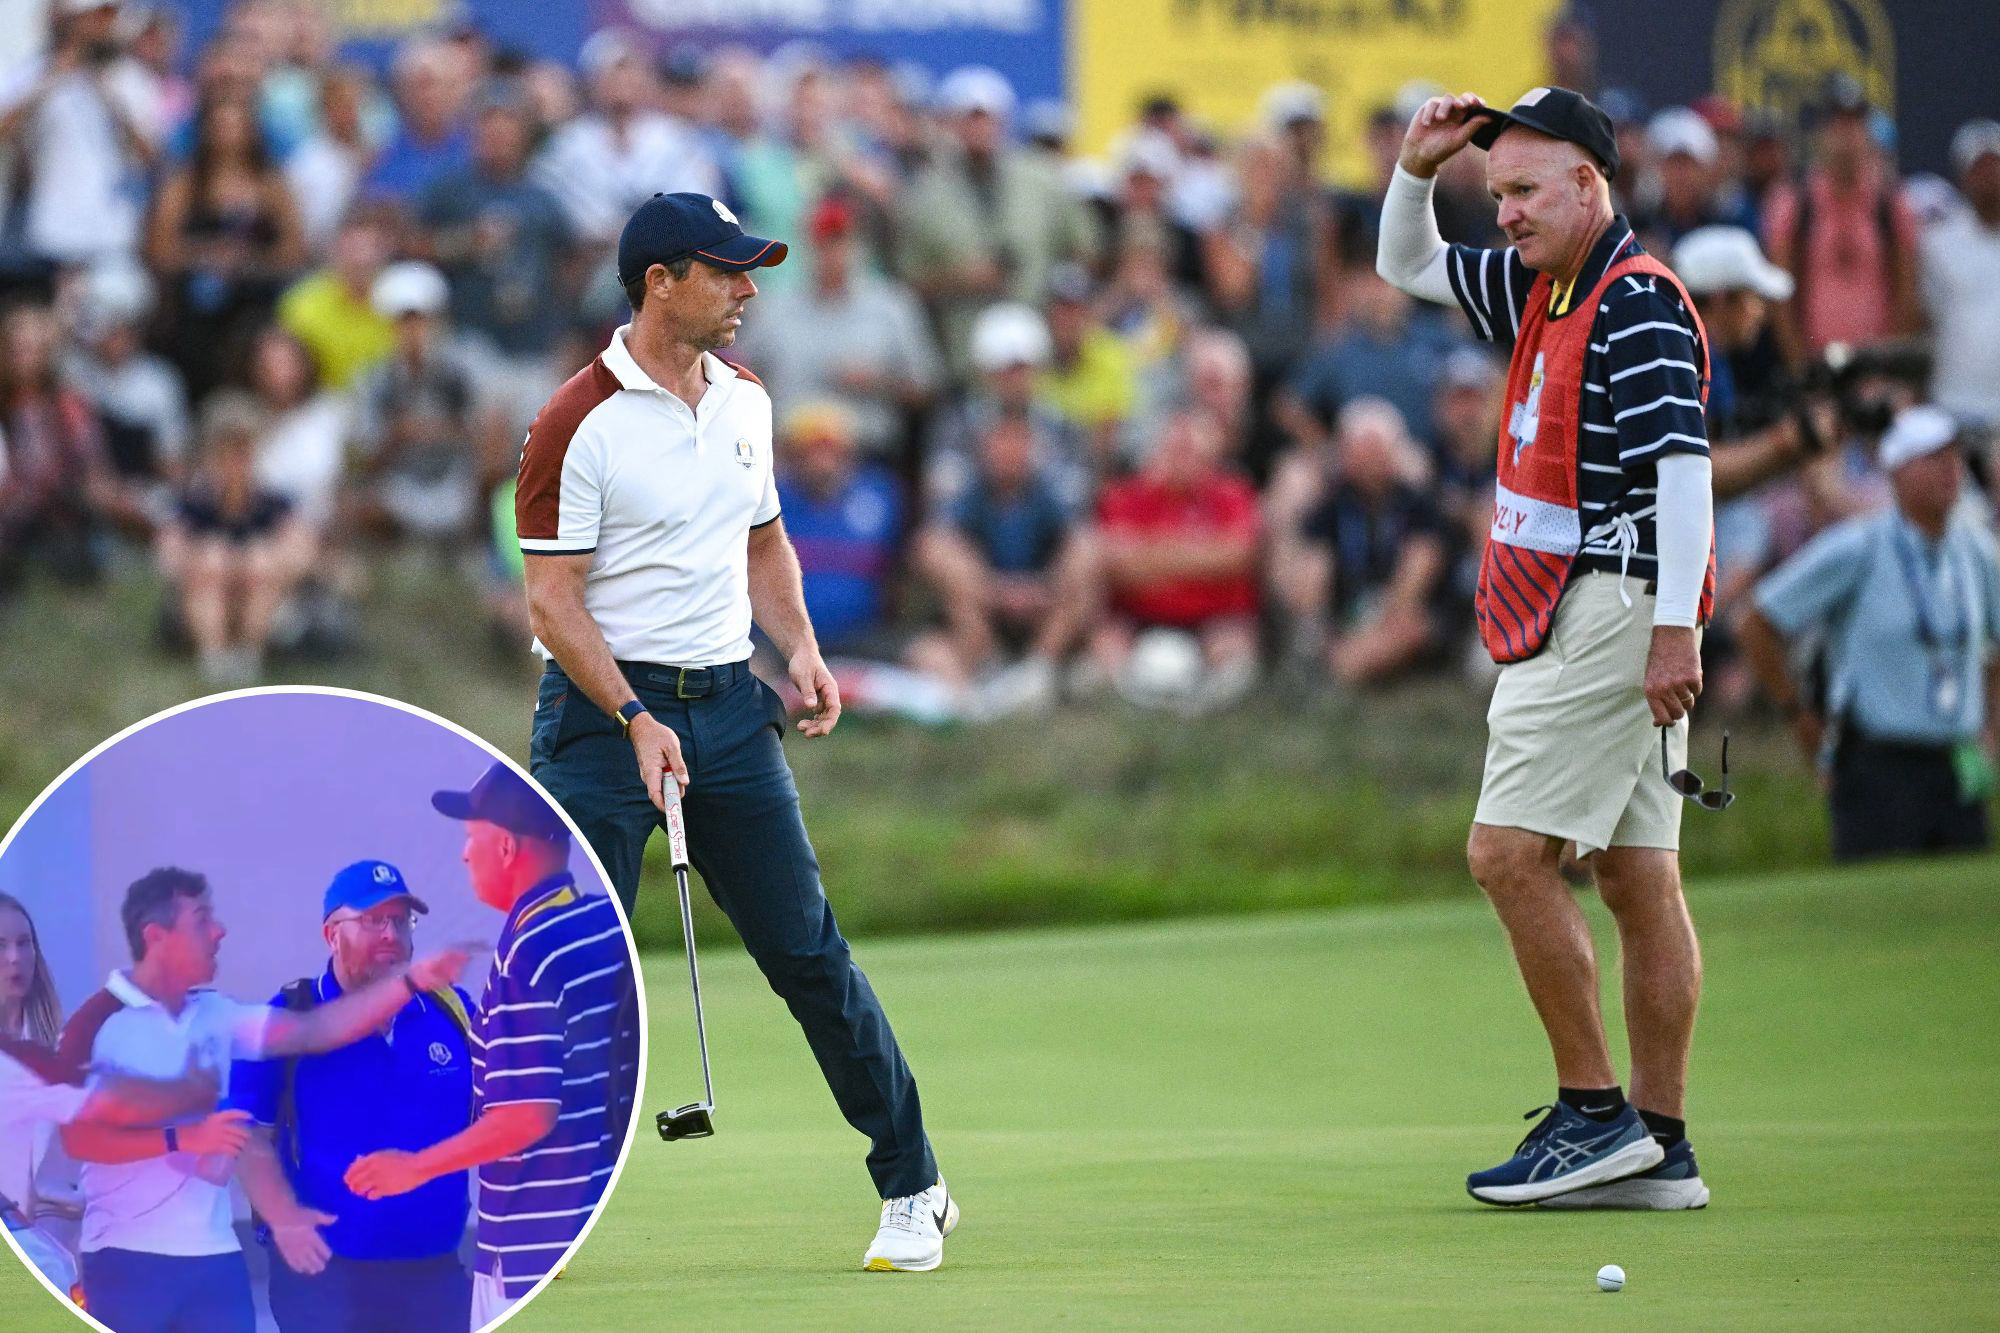 Rory McIlroy has heated outburst after Ryder Cup caddie drama